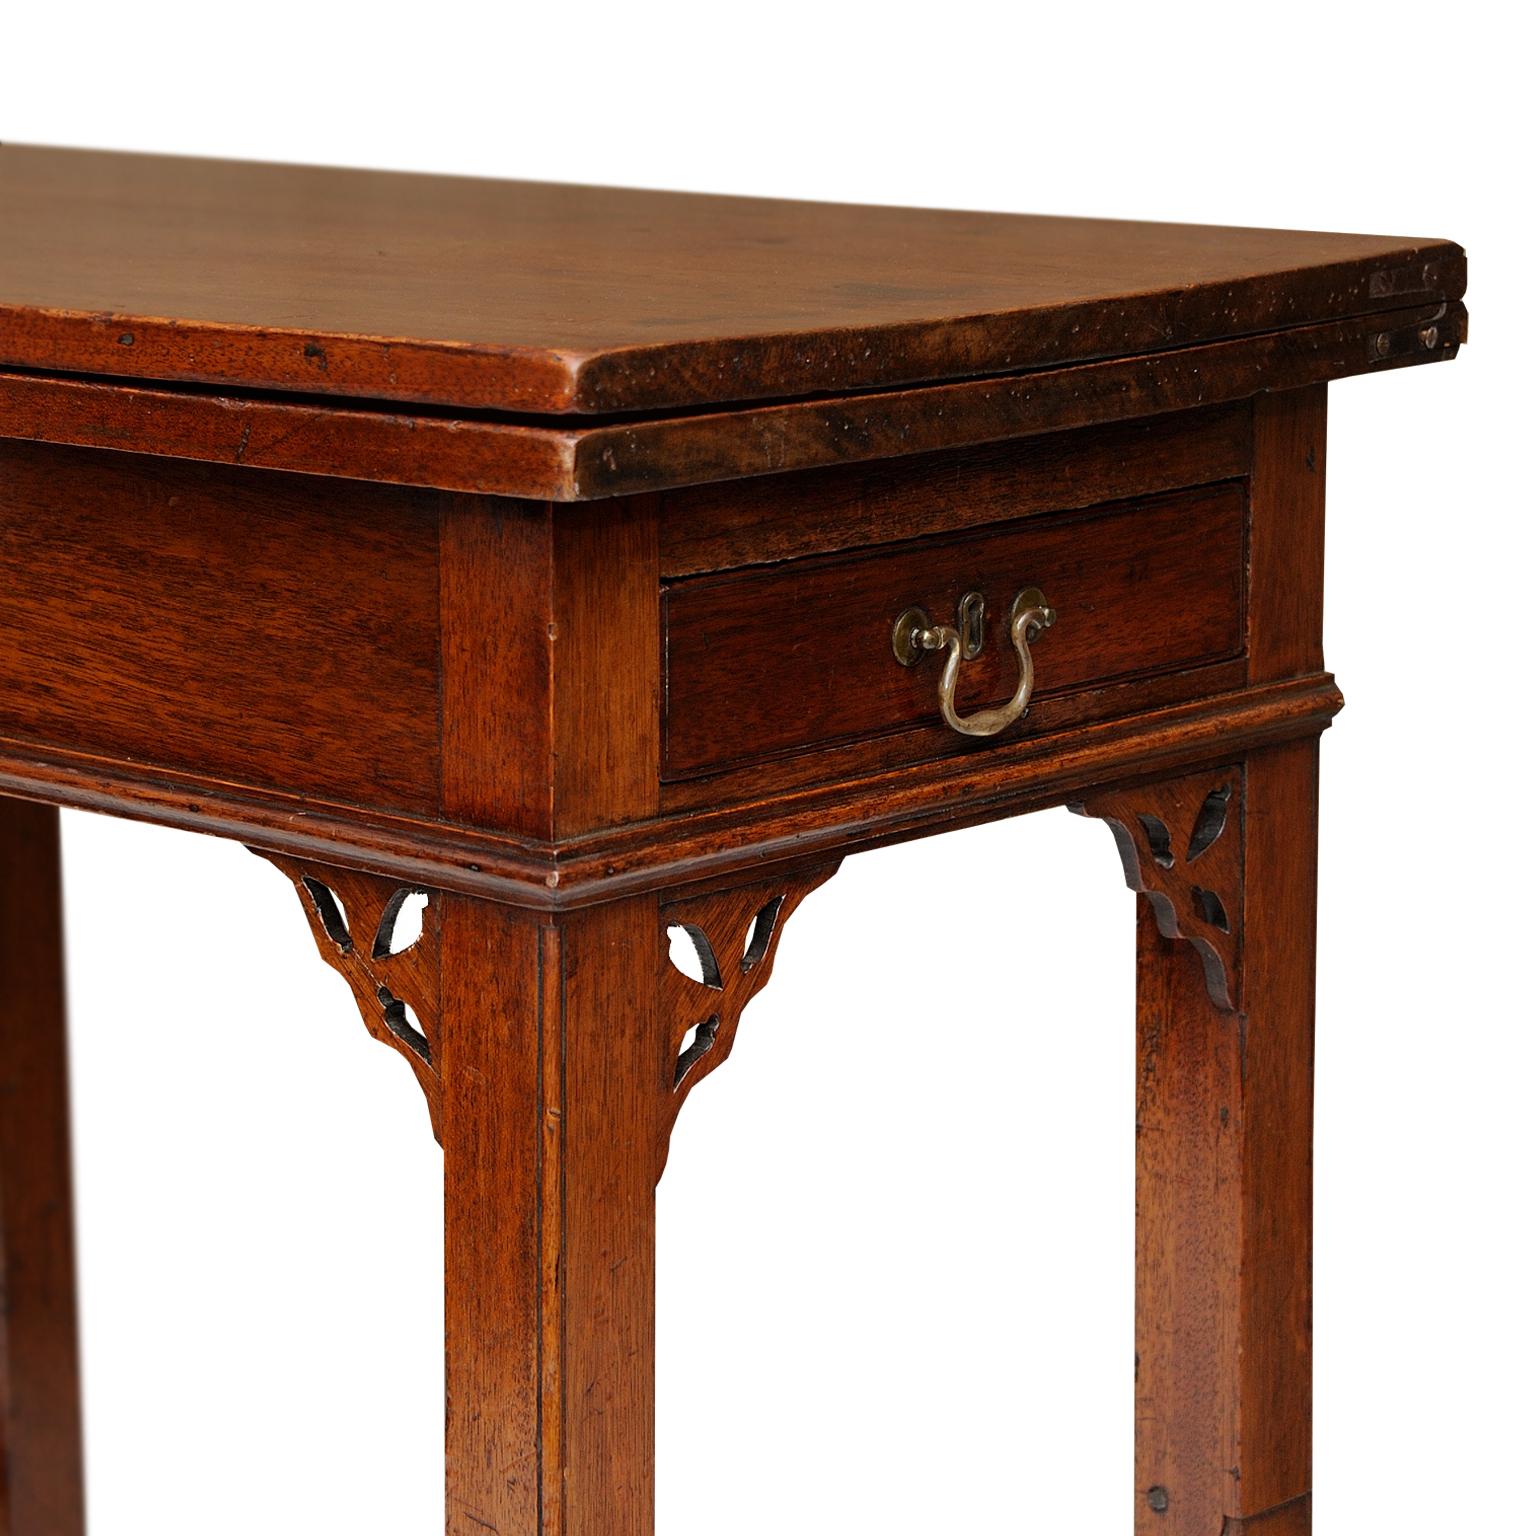 Brass Mahogany Chippendale Period Military Campaign Table, circa 1760 For Sale